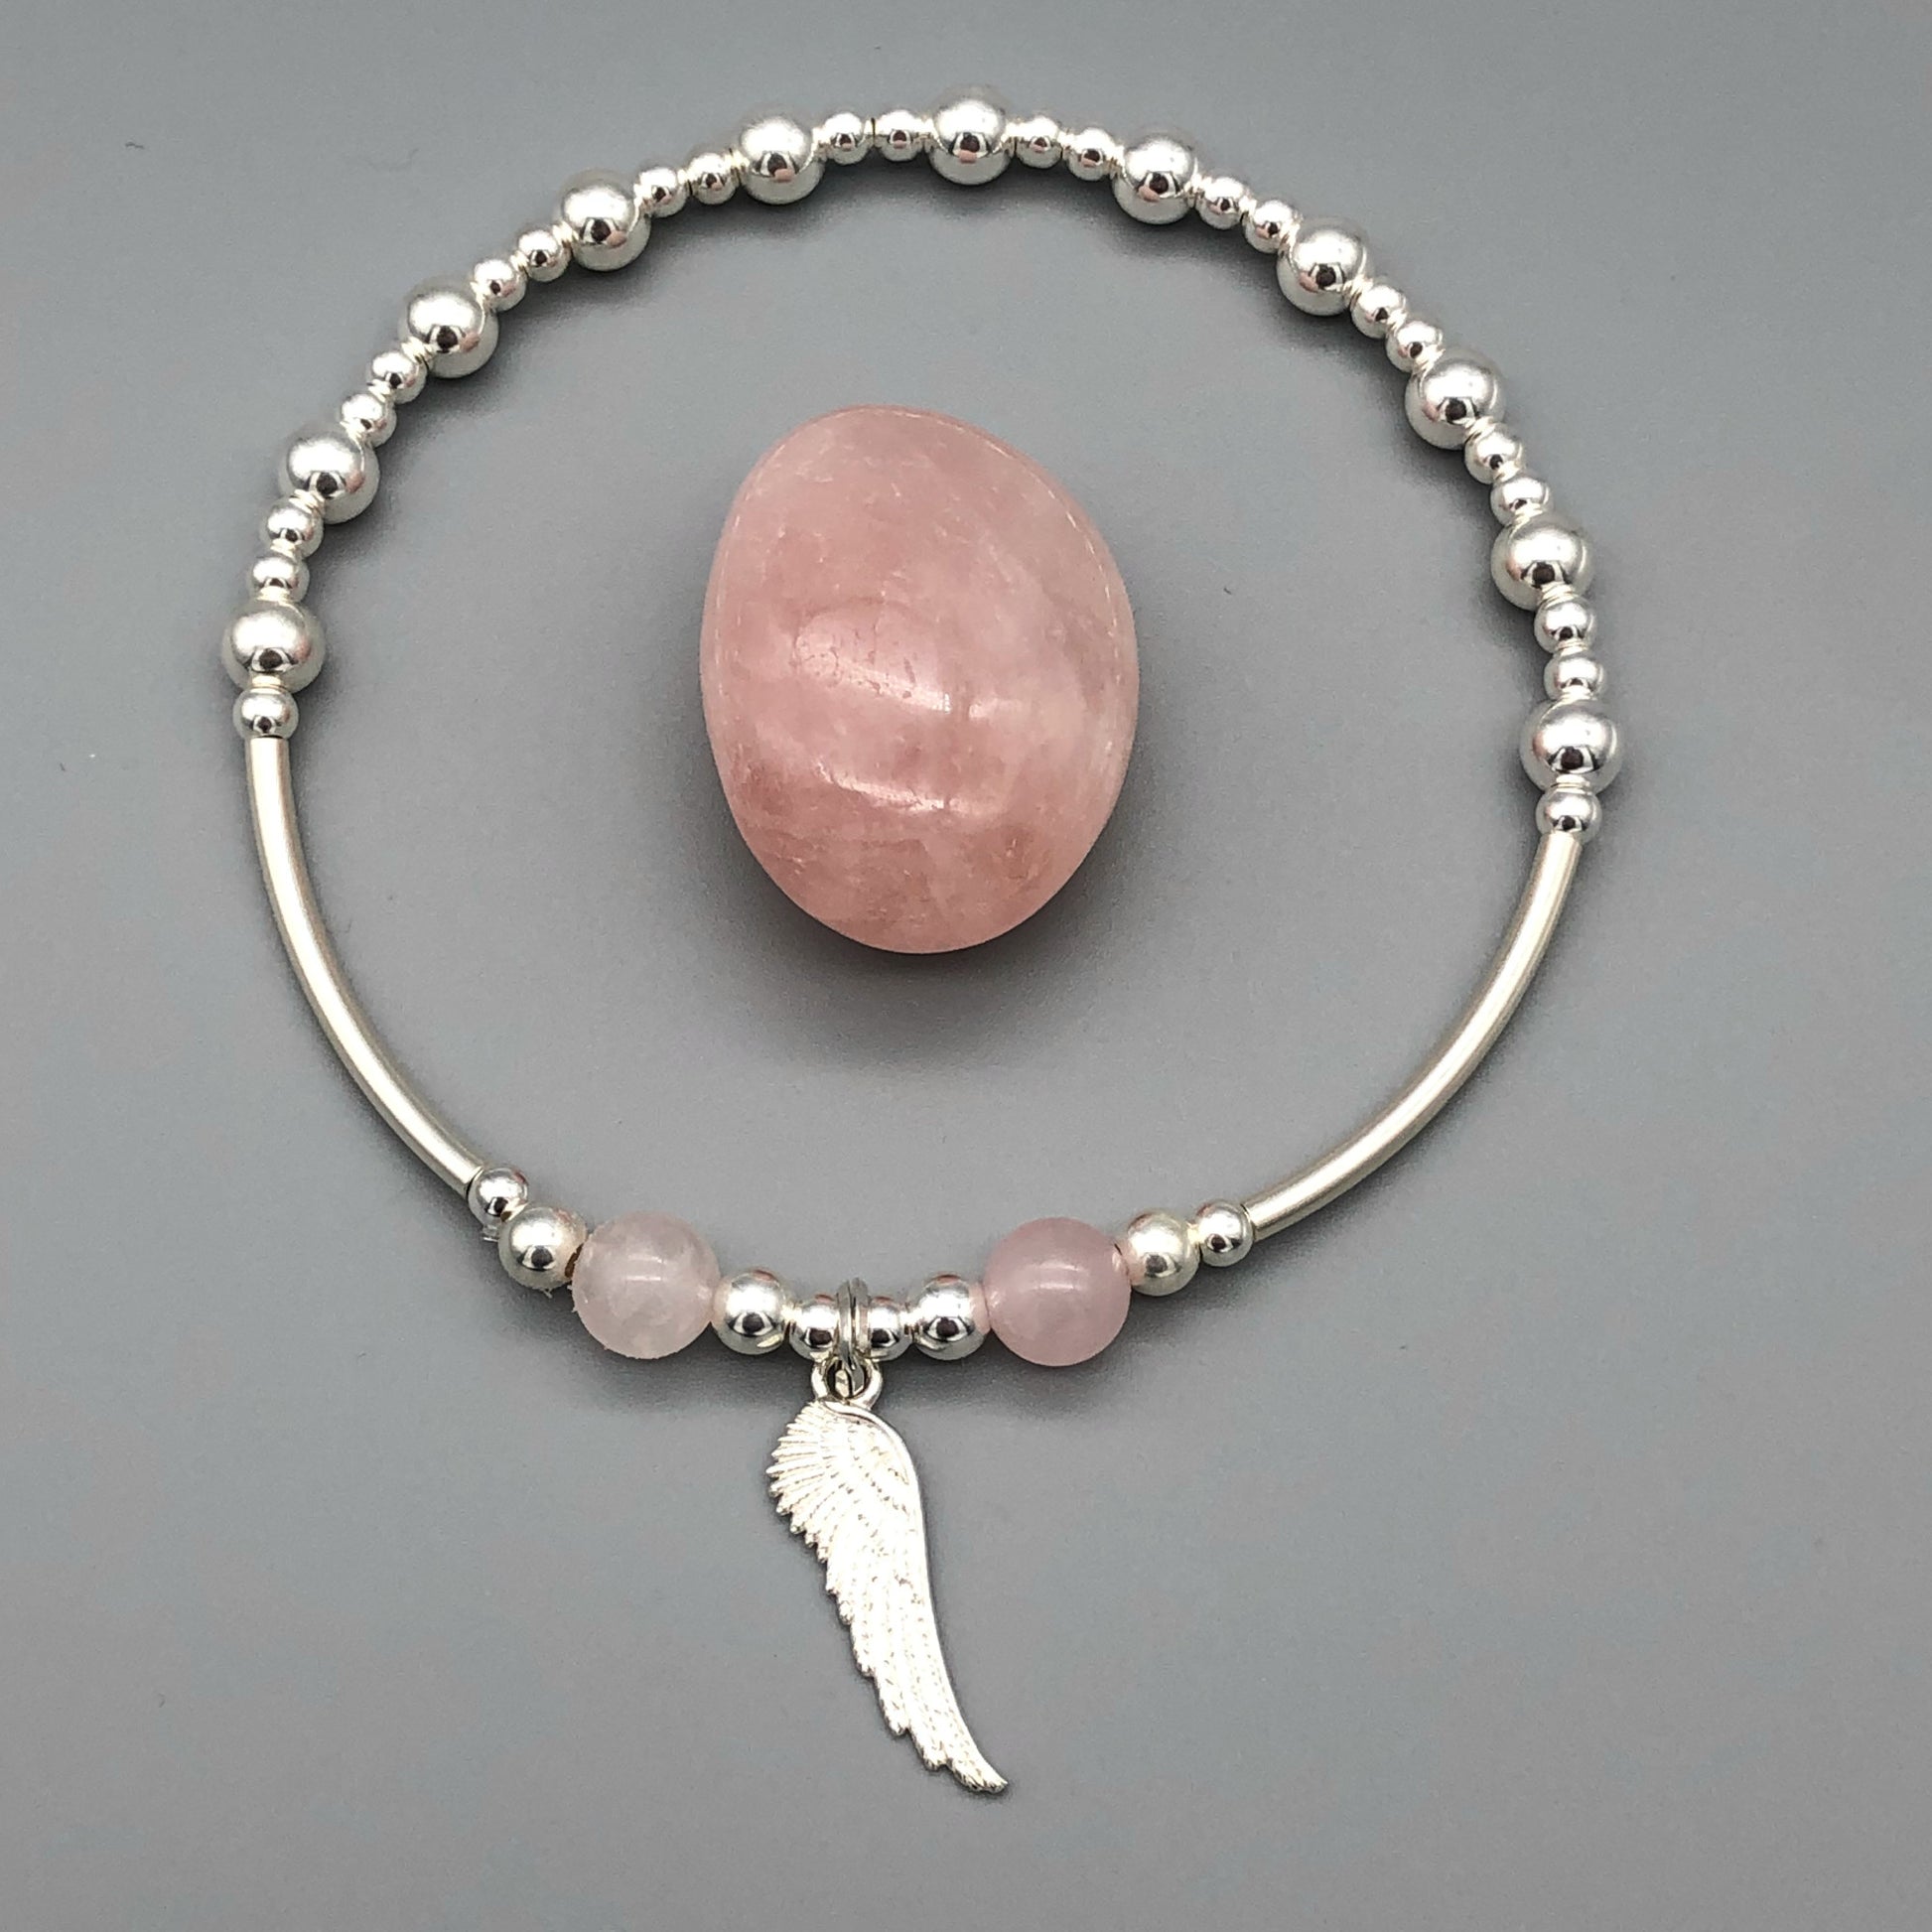 Angel wing charm & rose quartz sterling silver stacking bracelet by My Silver Wish